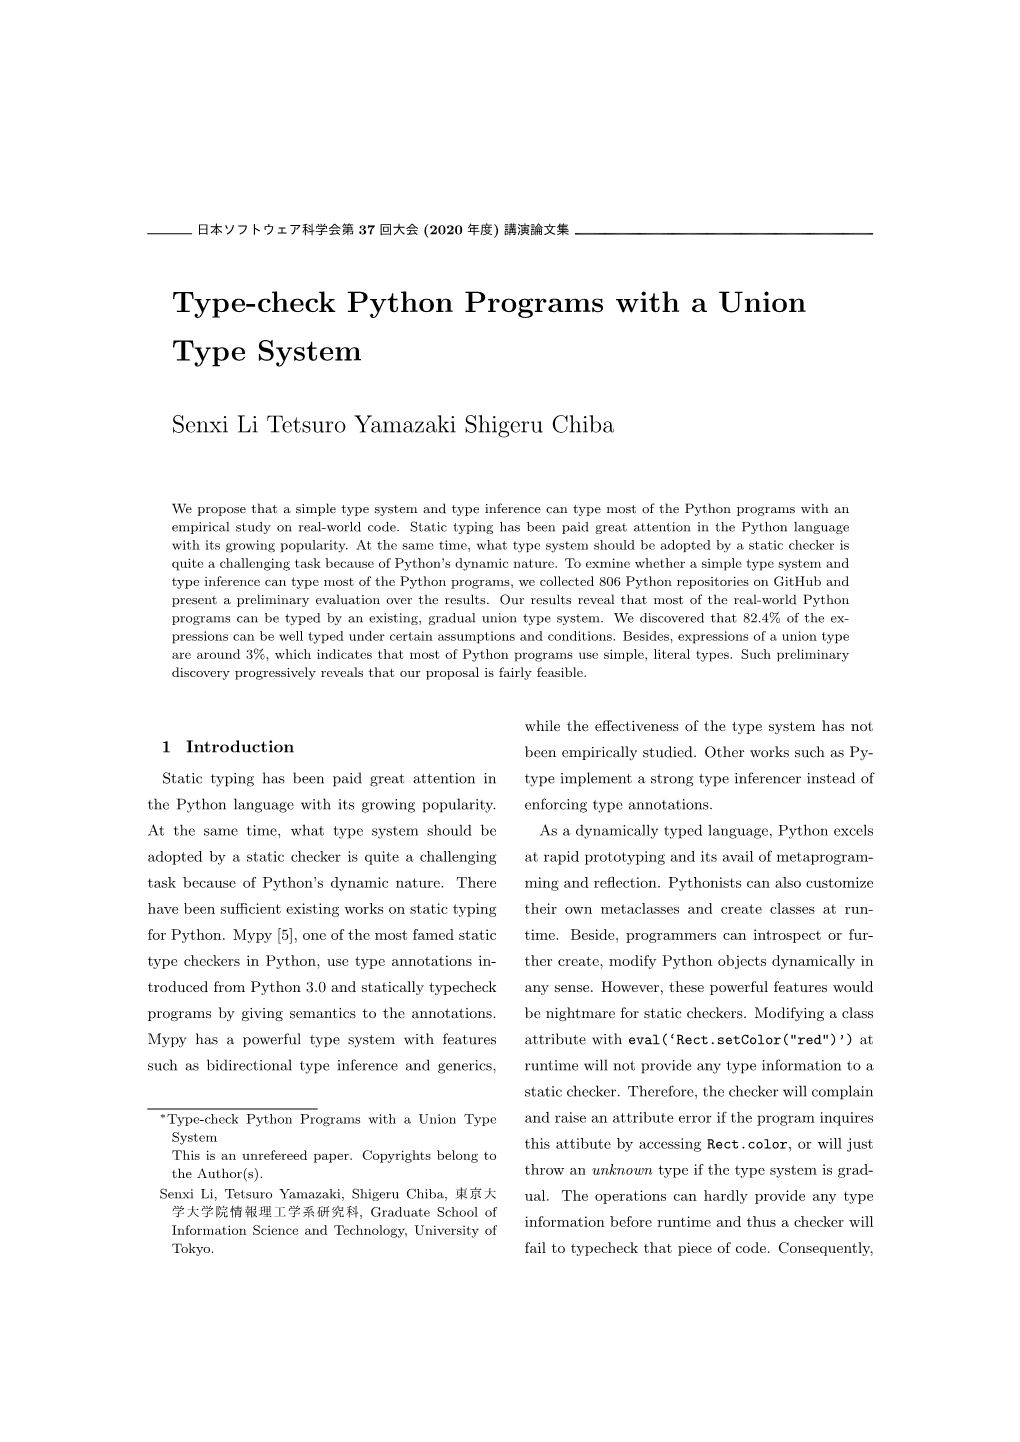 Type-Check Python Programs with a Union Type System